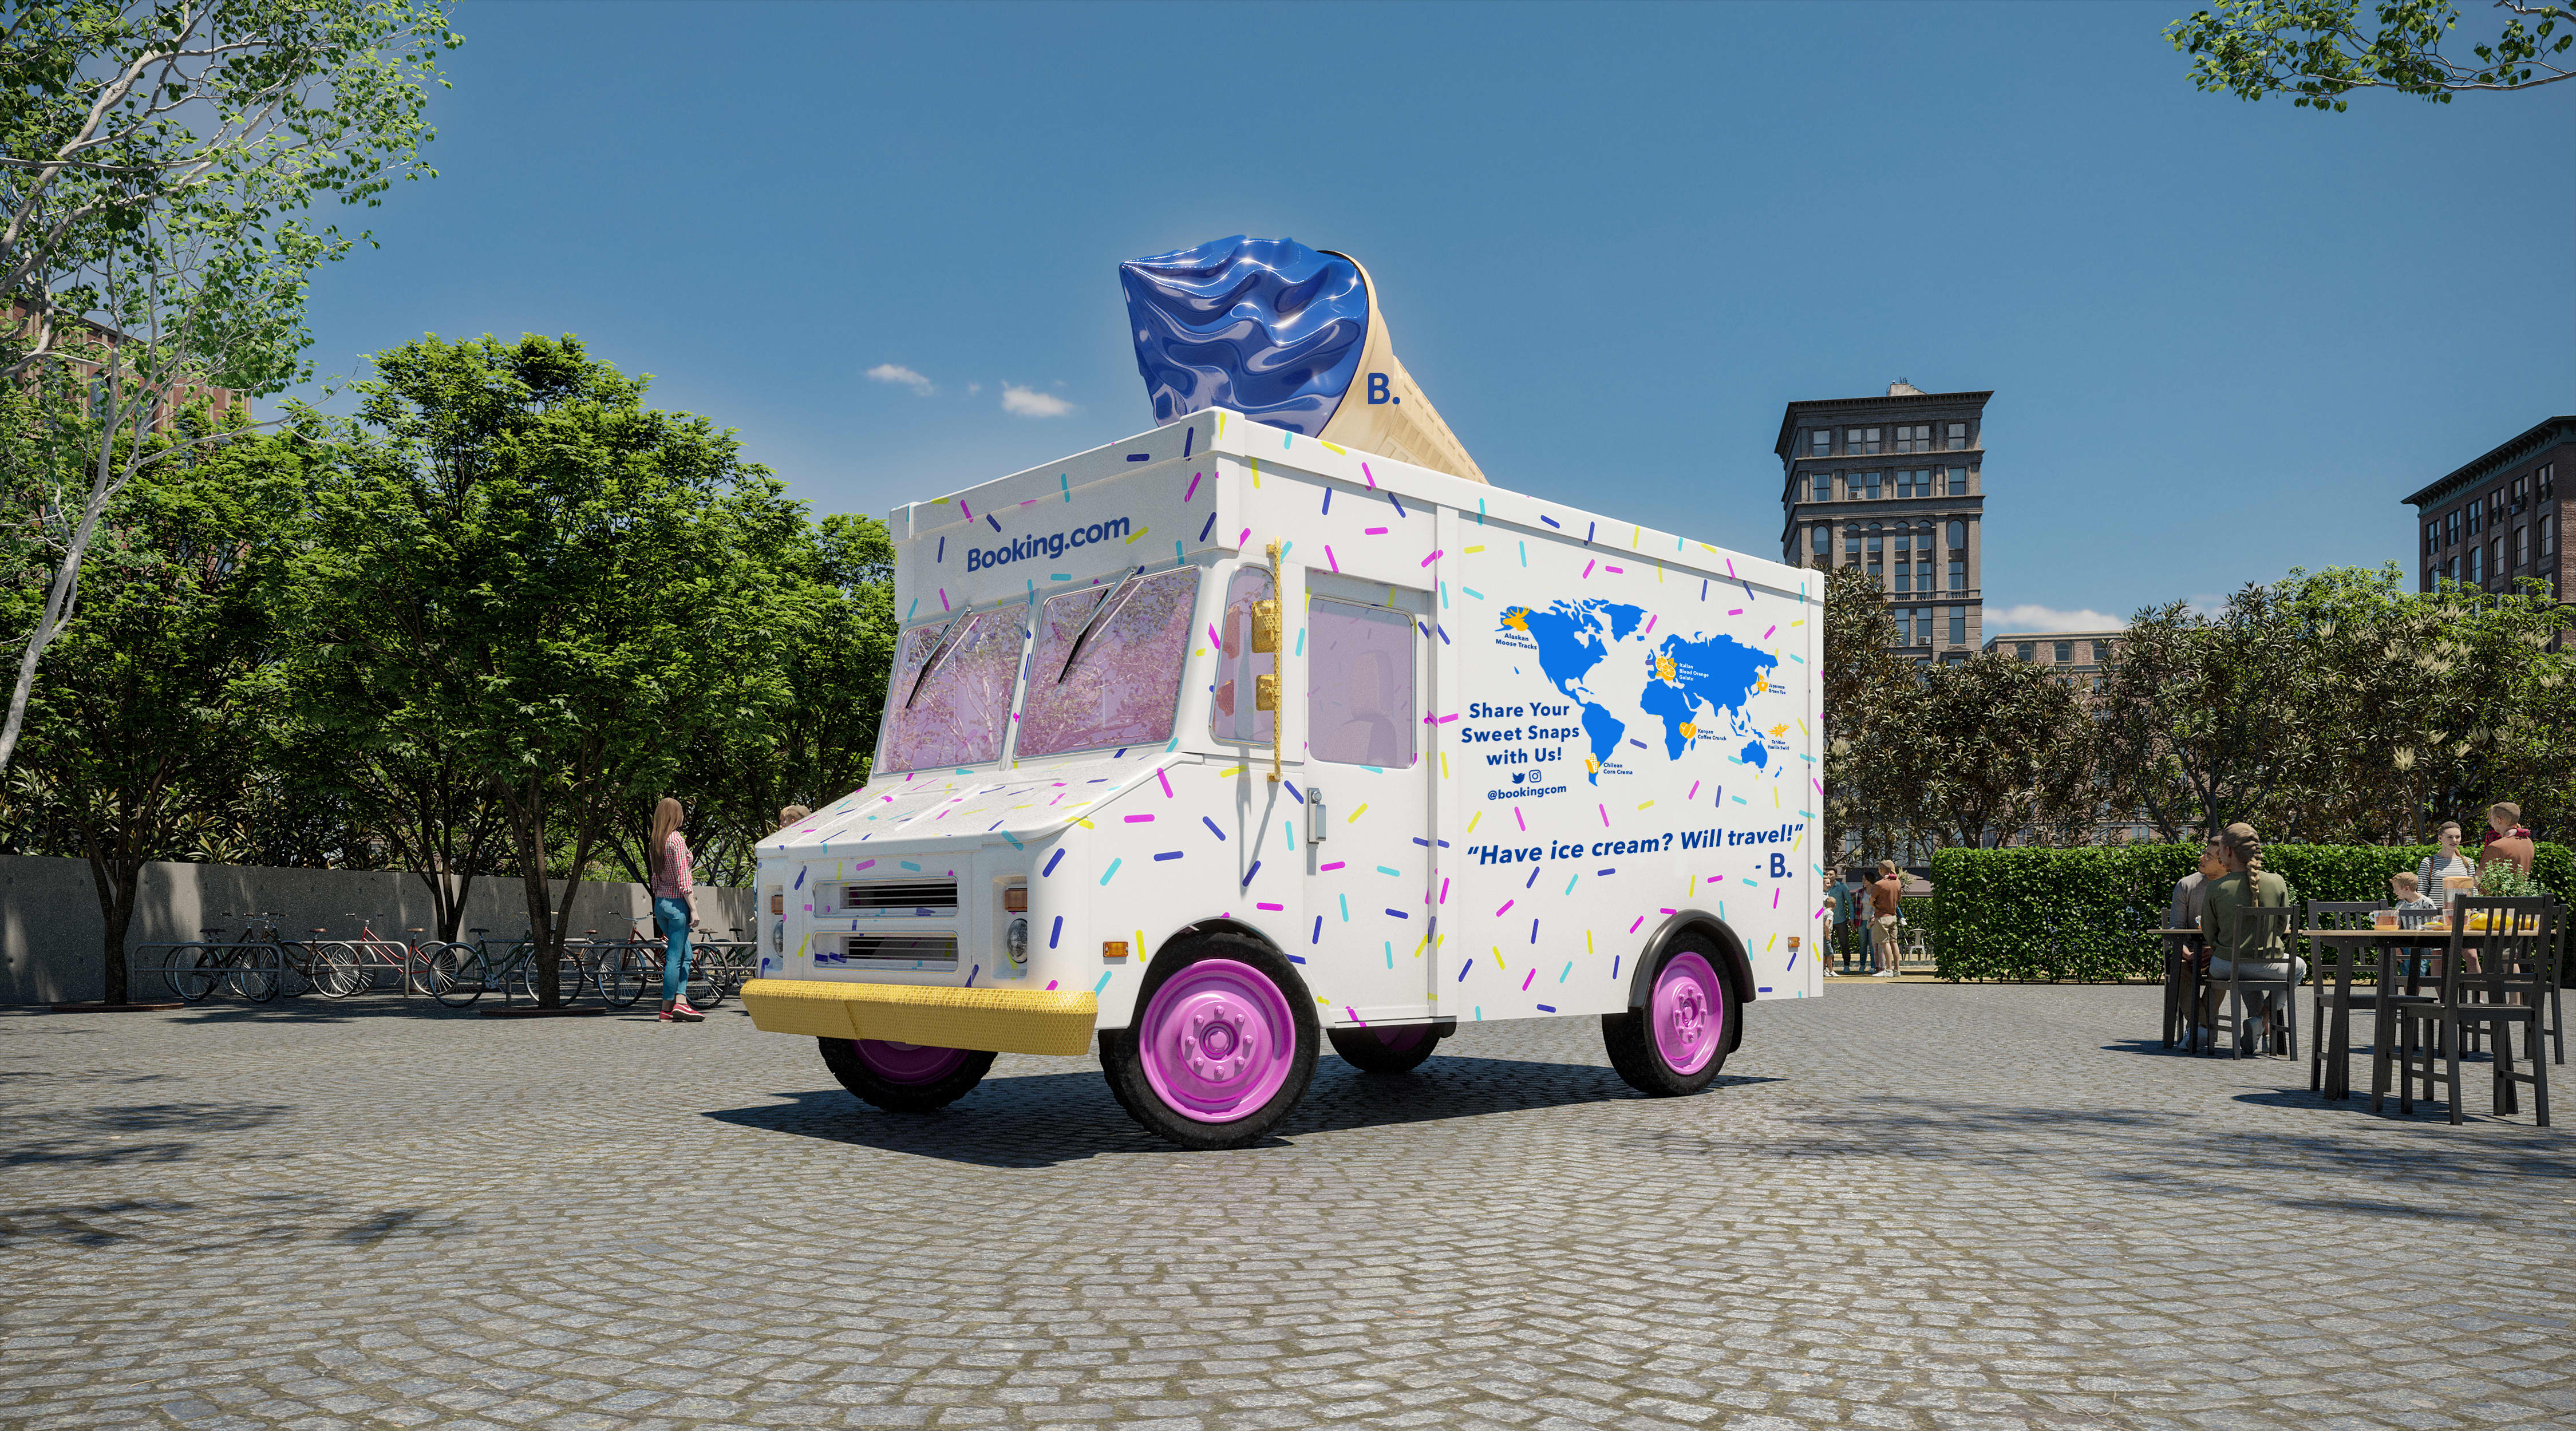 https://cdn.apartmenttherapy.info/image/upload/v1625769668/at/news-culture/2021-07/Booking.com_Ice_Cream_Truck_Exterior.jpg